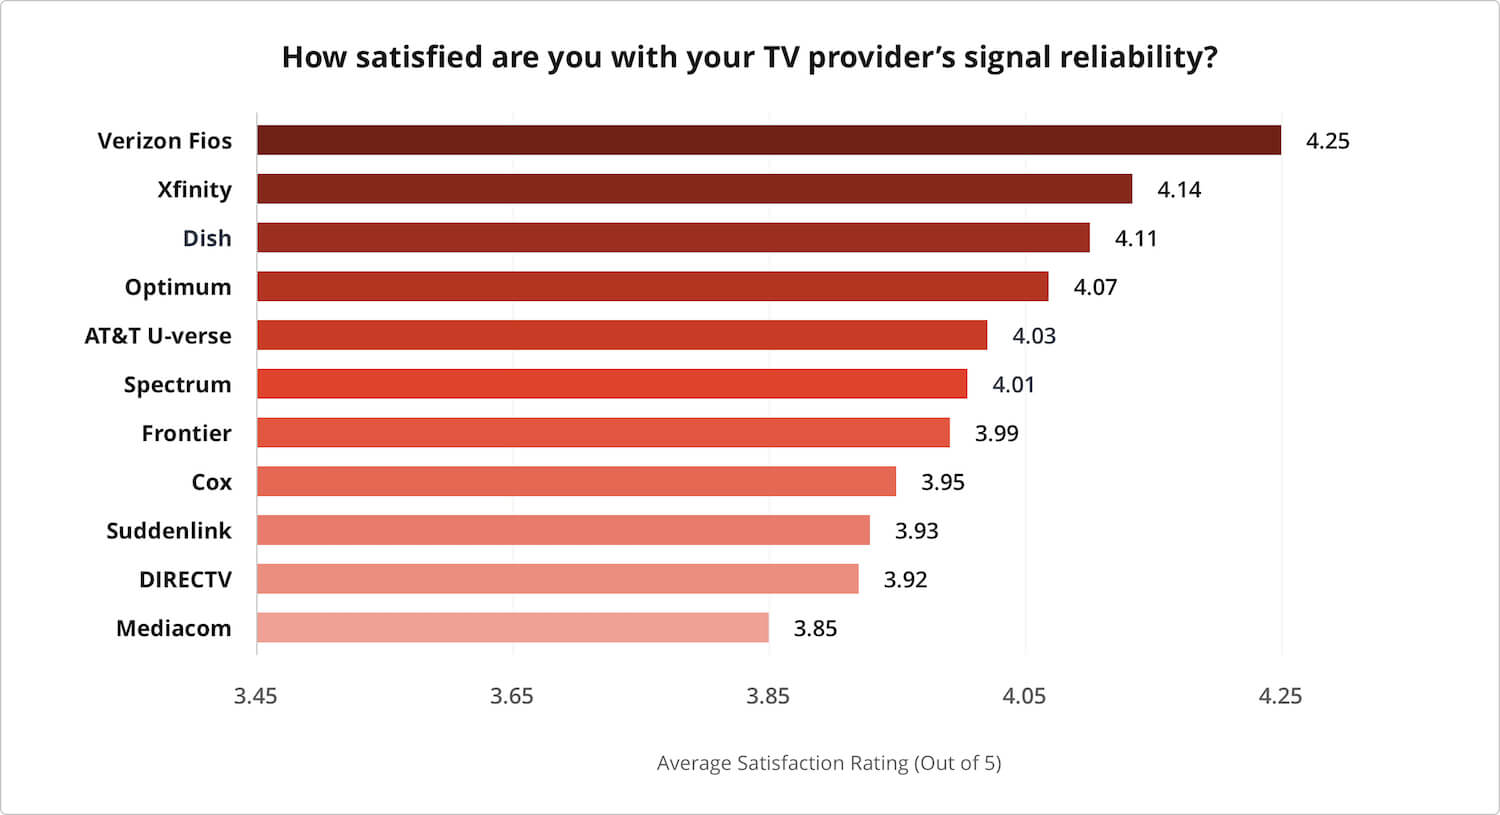 Satisfaction survey results for TV provider's signal reliability